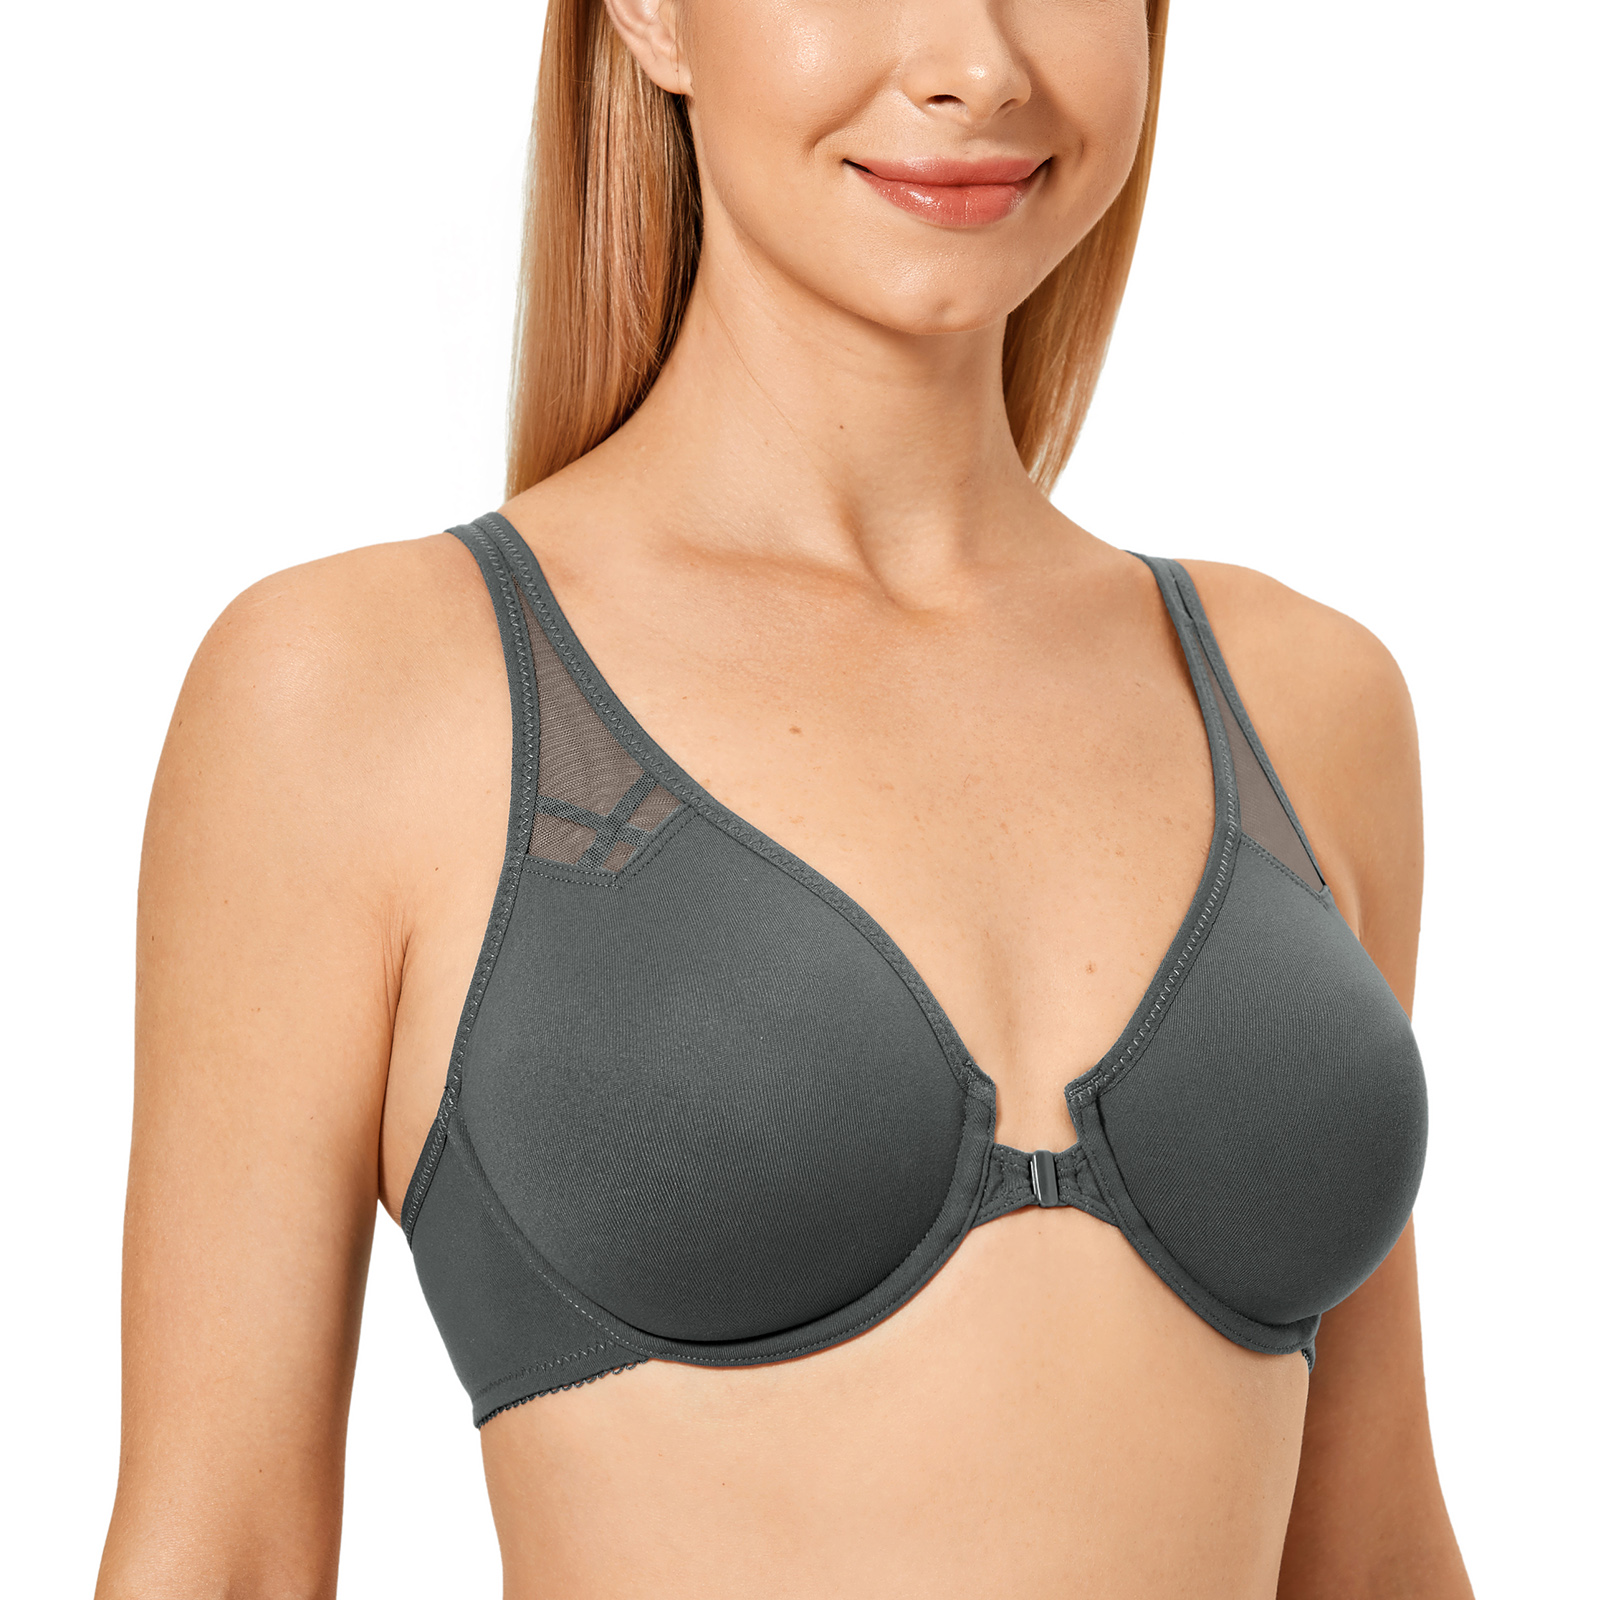 Delimira Women's New Full coverage Non Padded Seamless Underwire